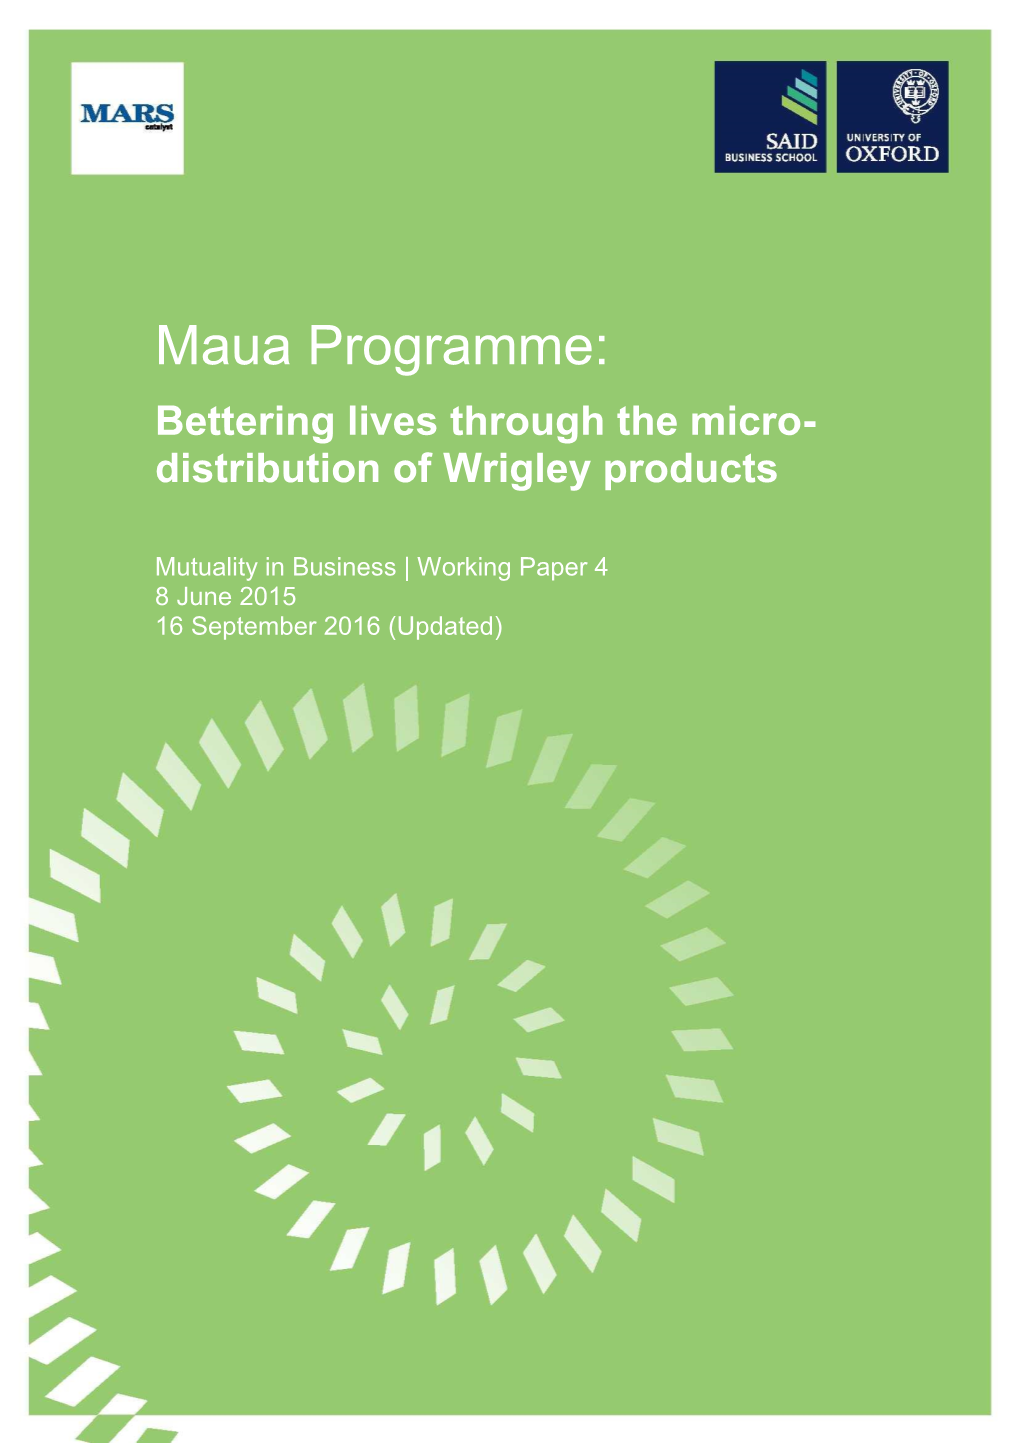 Maua Programme: Bettering Lives Through the Micro- Distribution of Wrigley Products